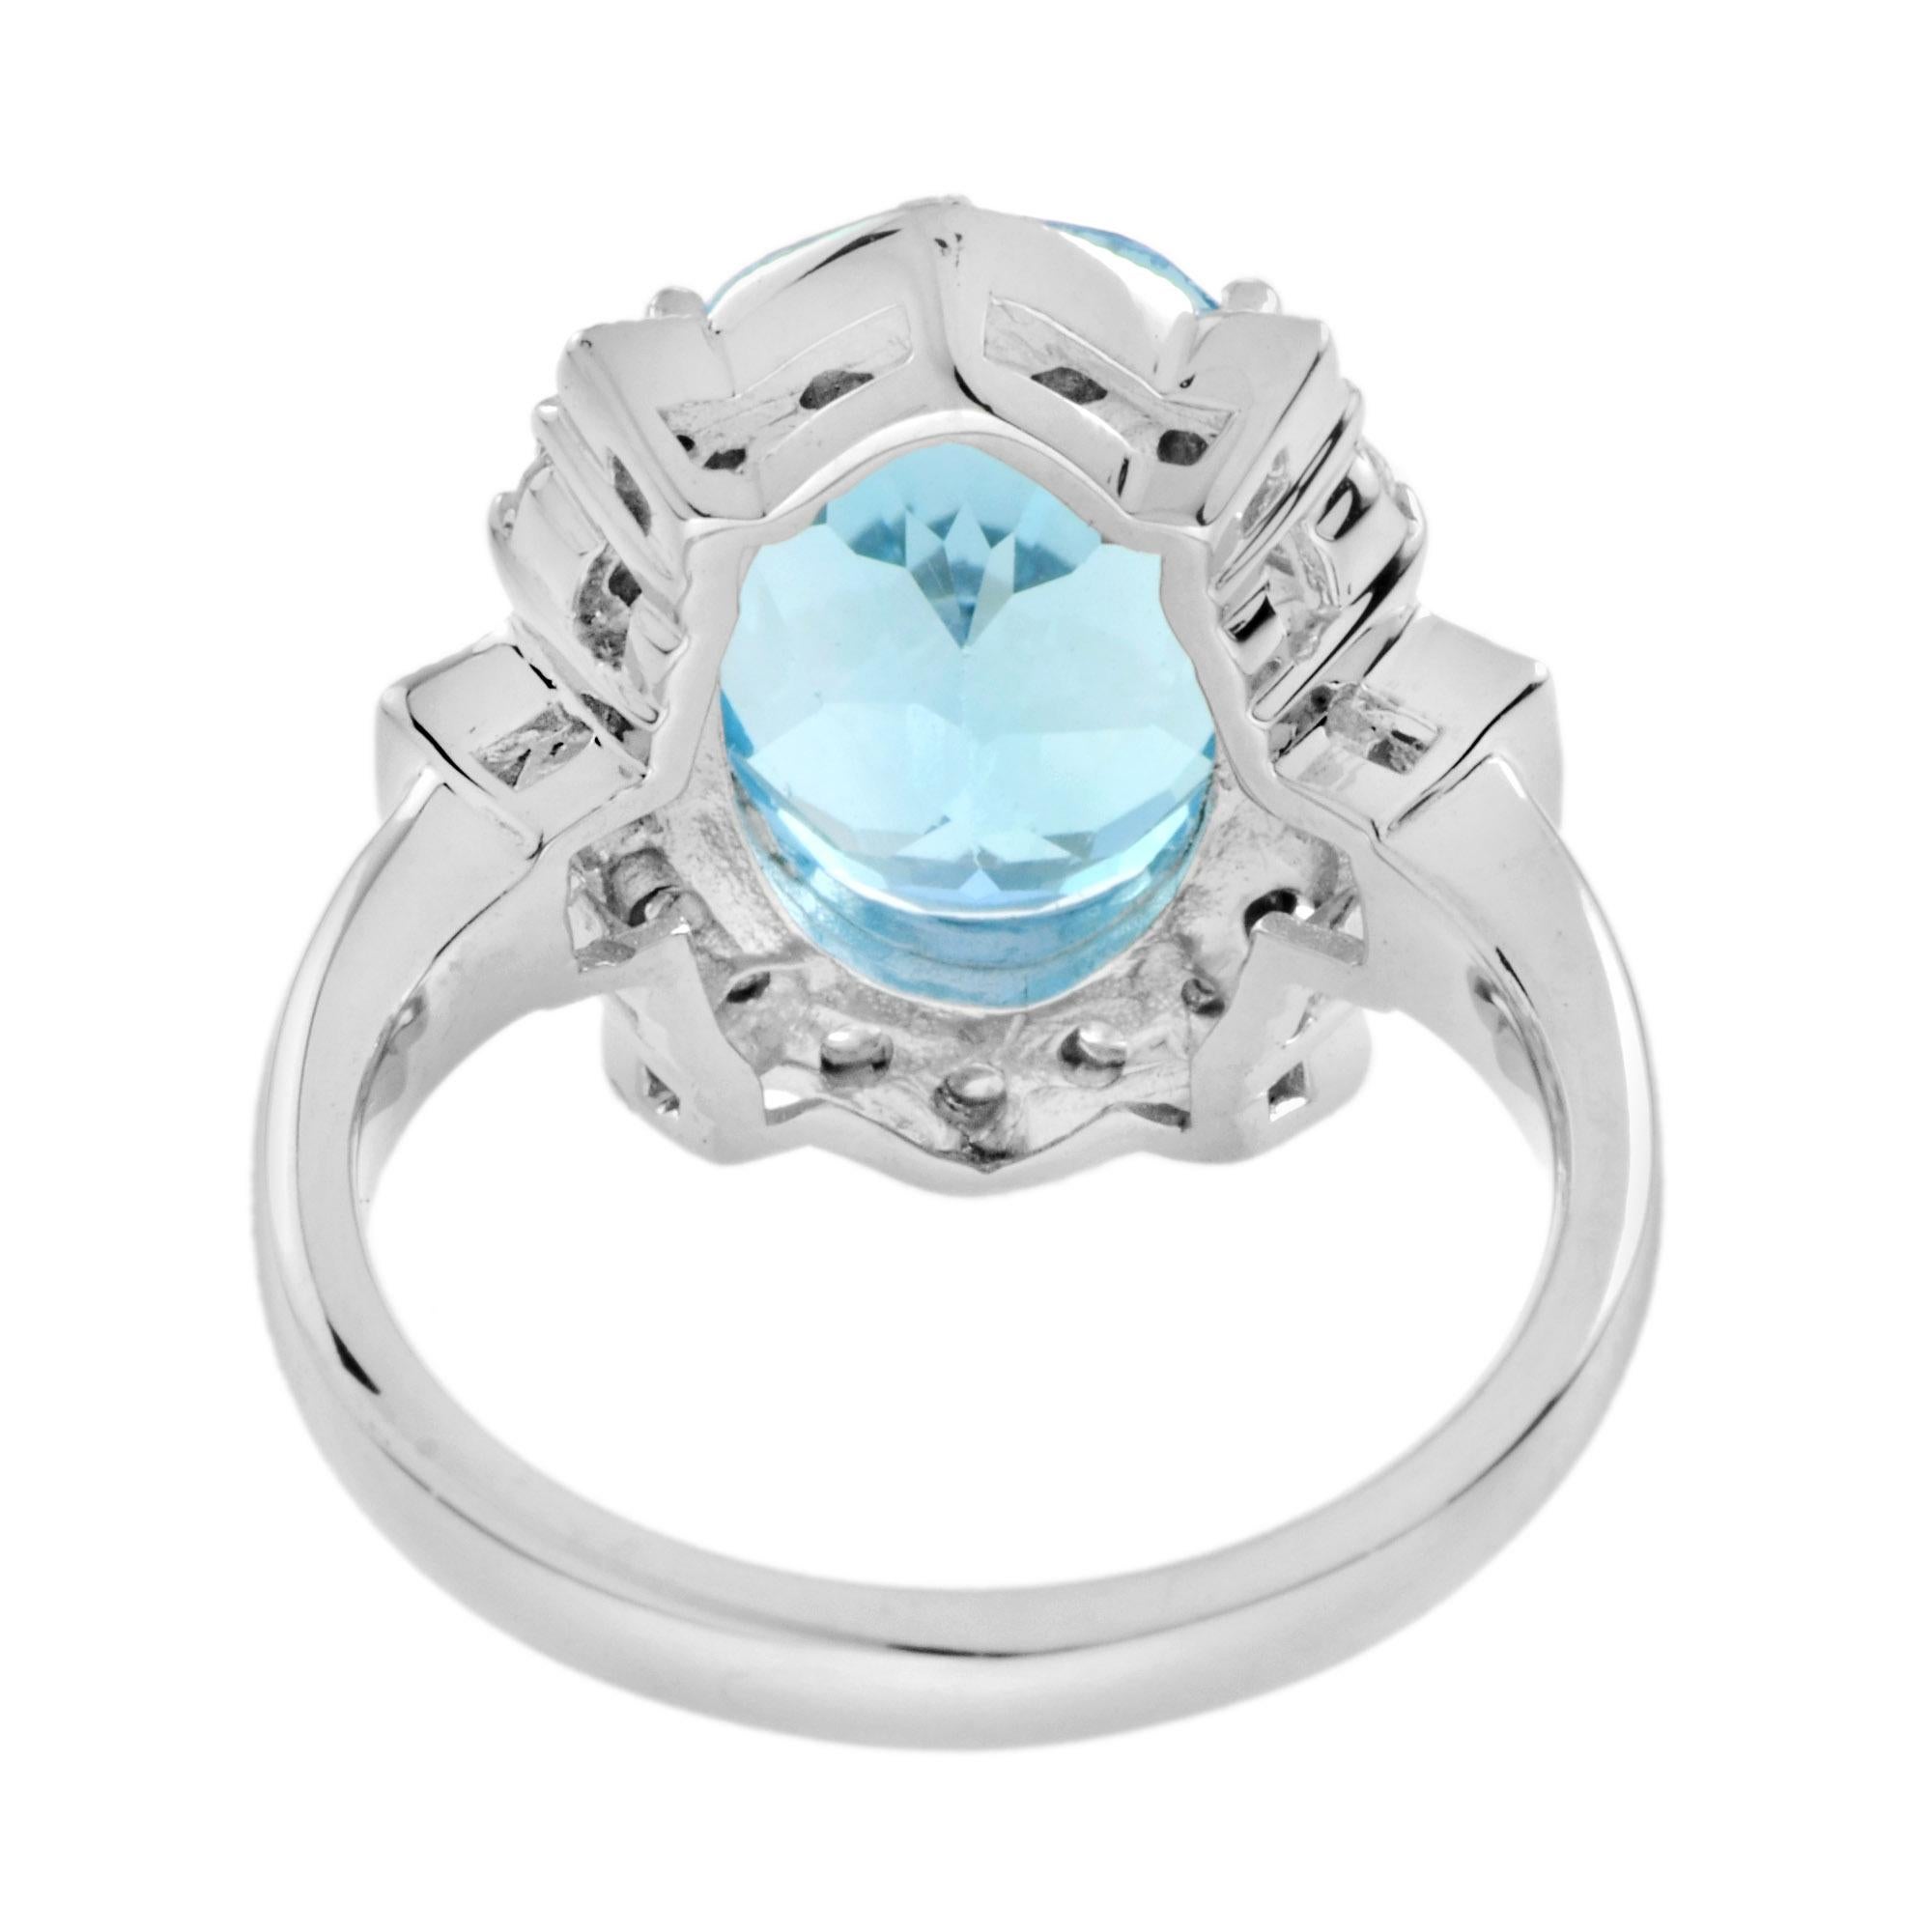 For Sale:  7.25 Ct. Oval Blue Topaz and Diamond Cocktail Ring in 18K White Gold 4